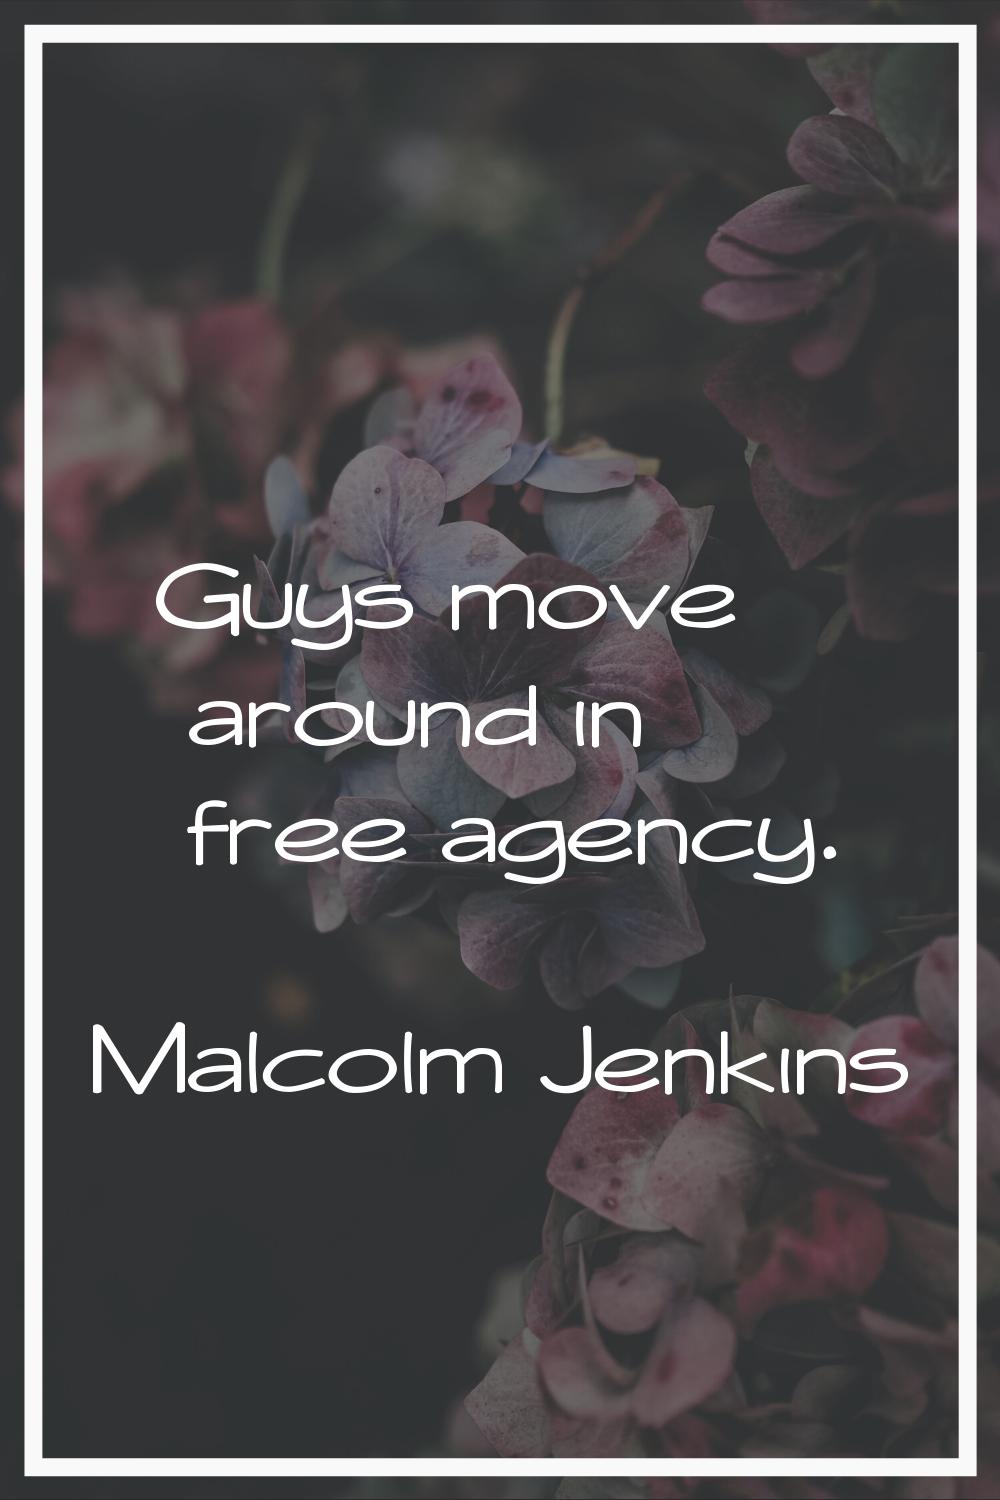 Guys move around in free agency.